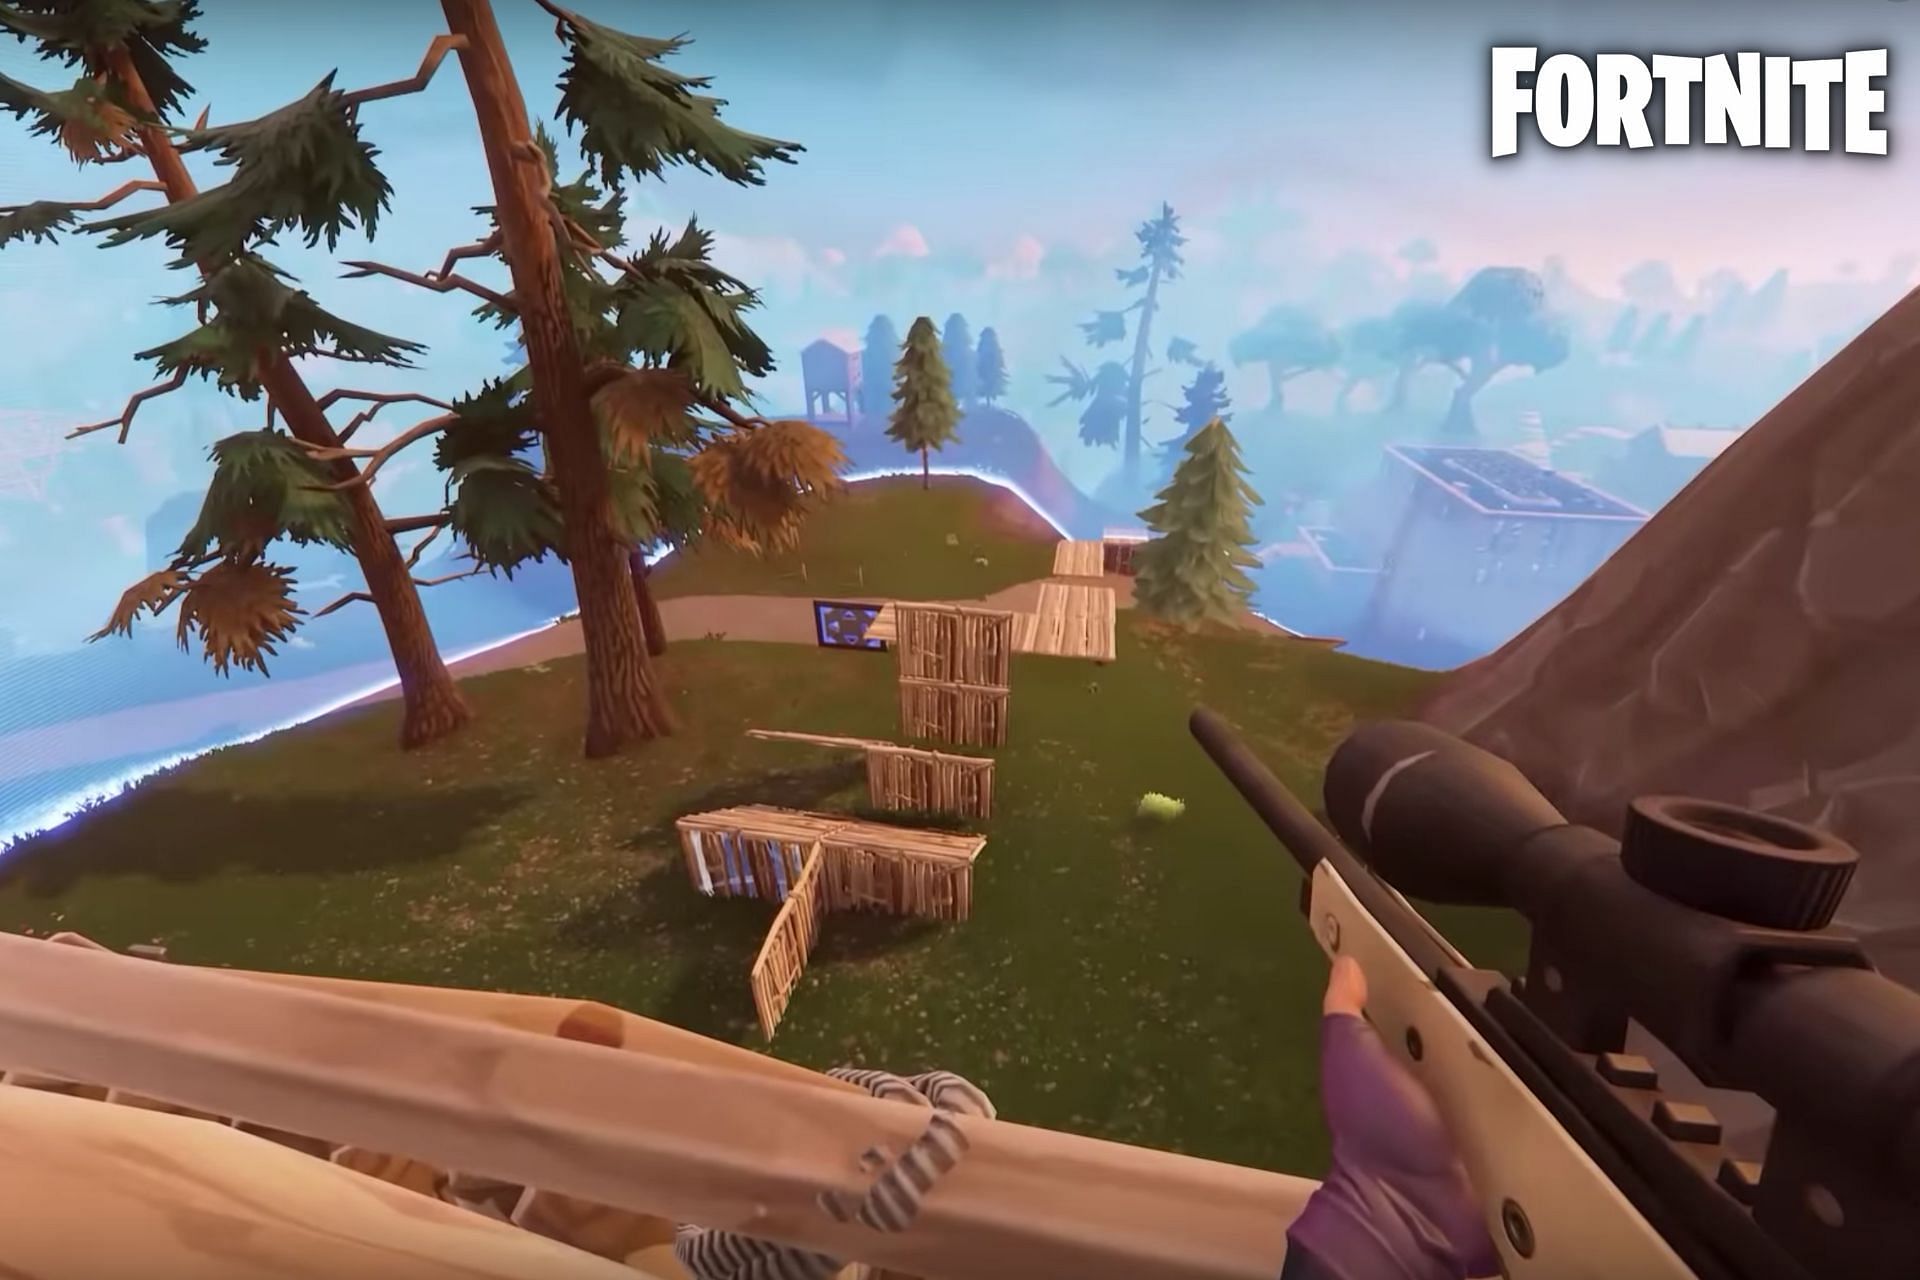 First-Person Perspective in Fortnite Battle Royale (Image via Sportskeeda)